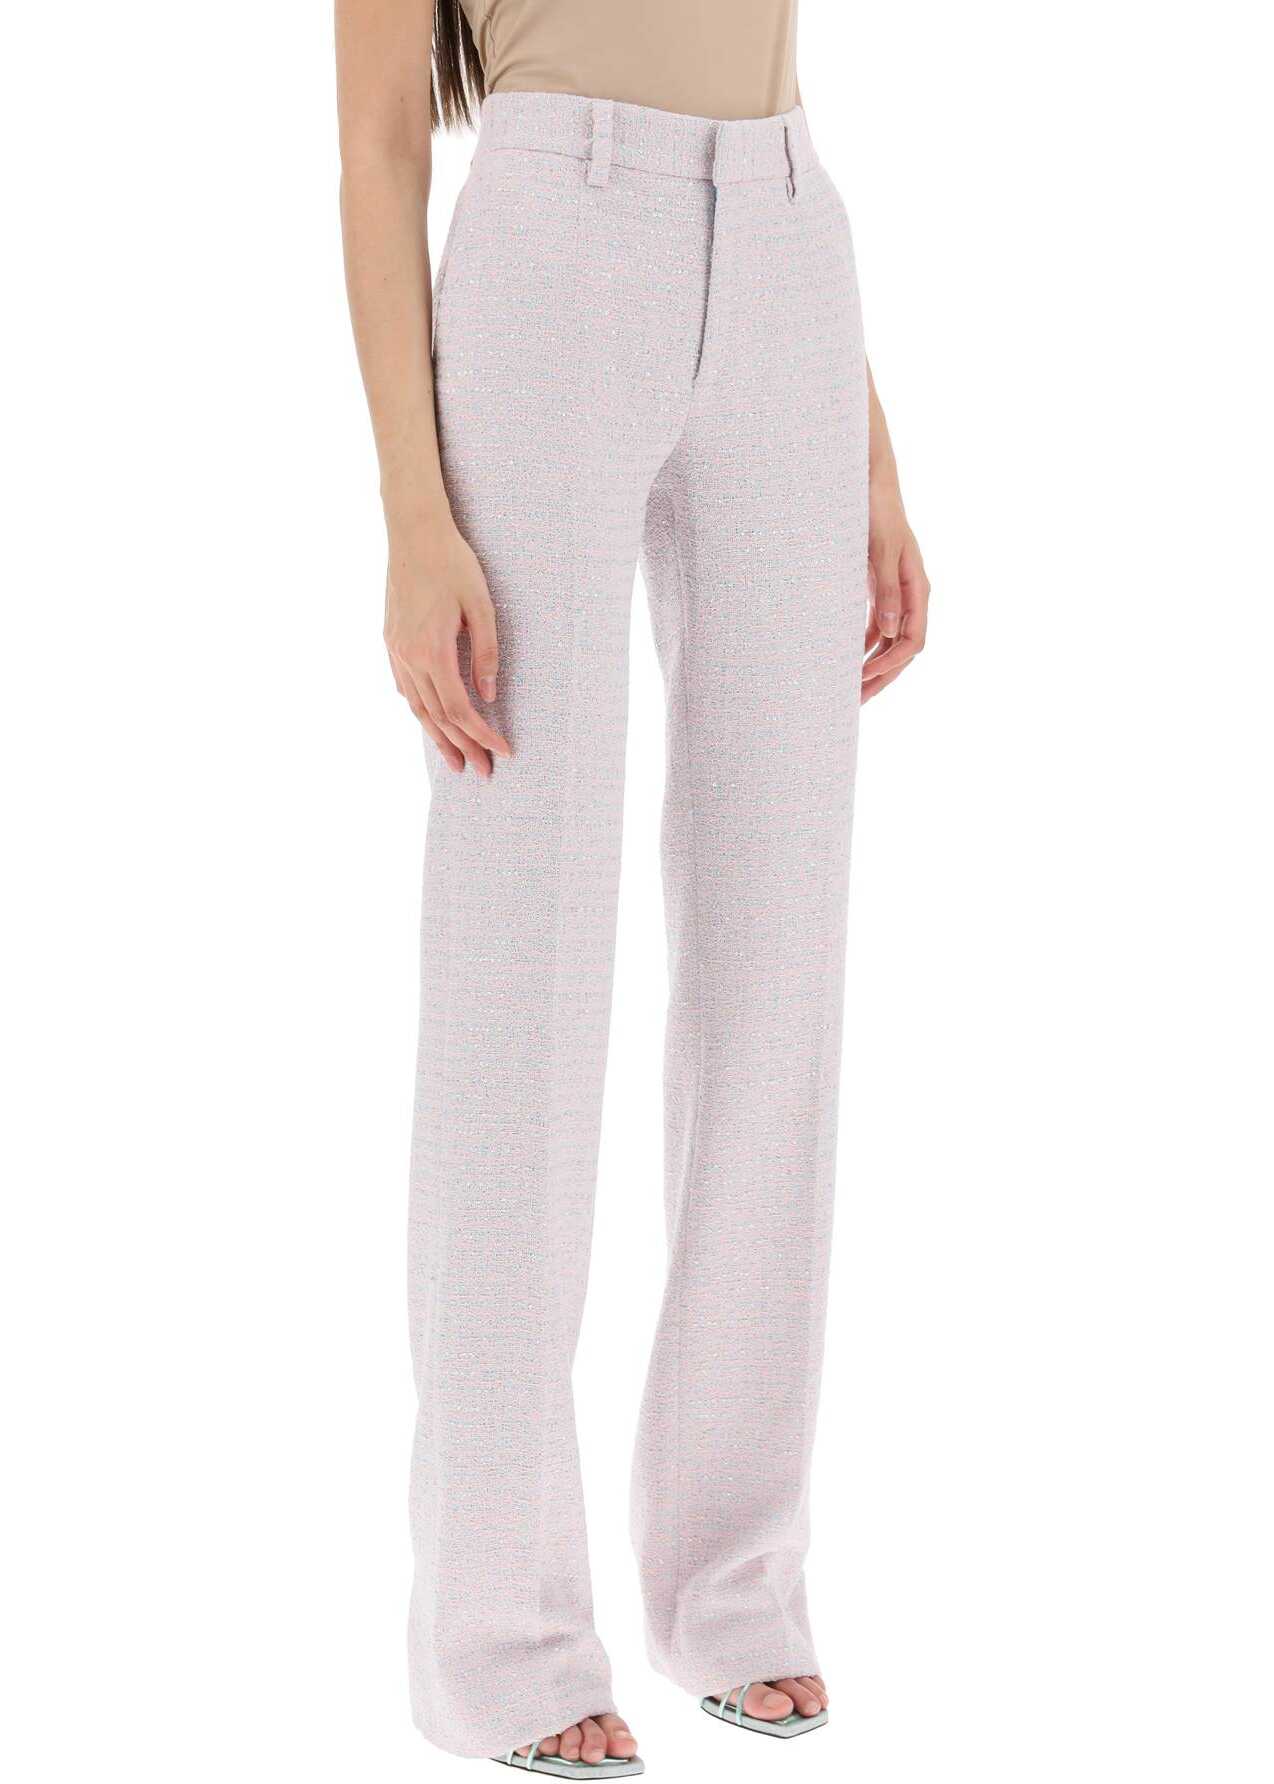 Alessandra Rich Pants In Tweed Boucle\' LIGHT BLUE PINK